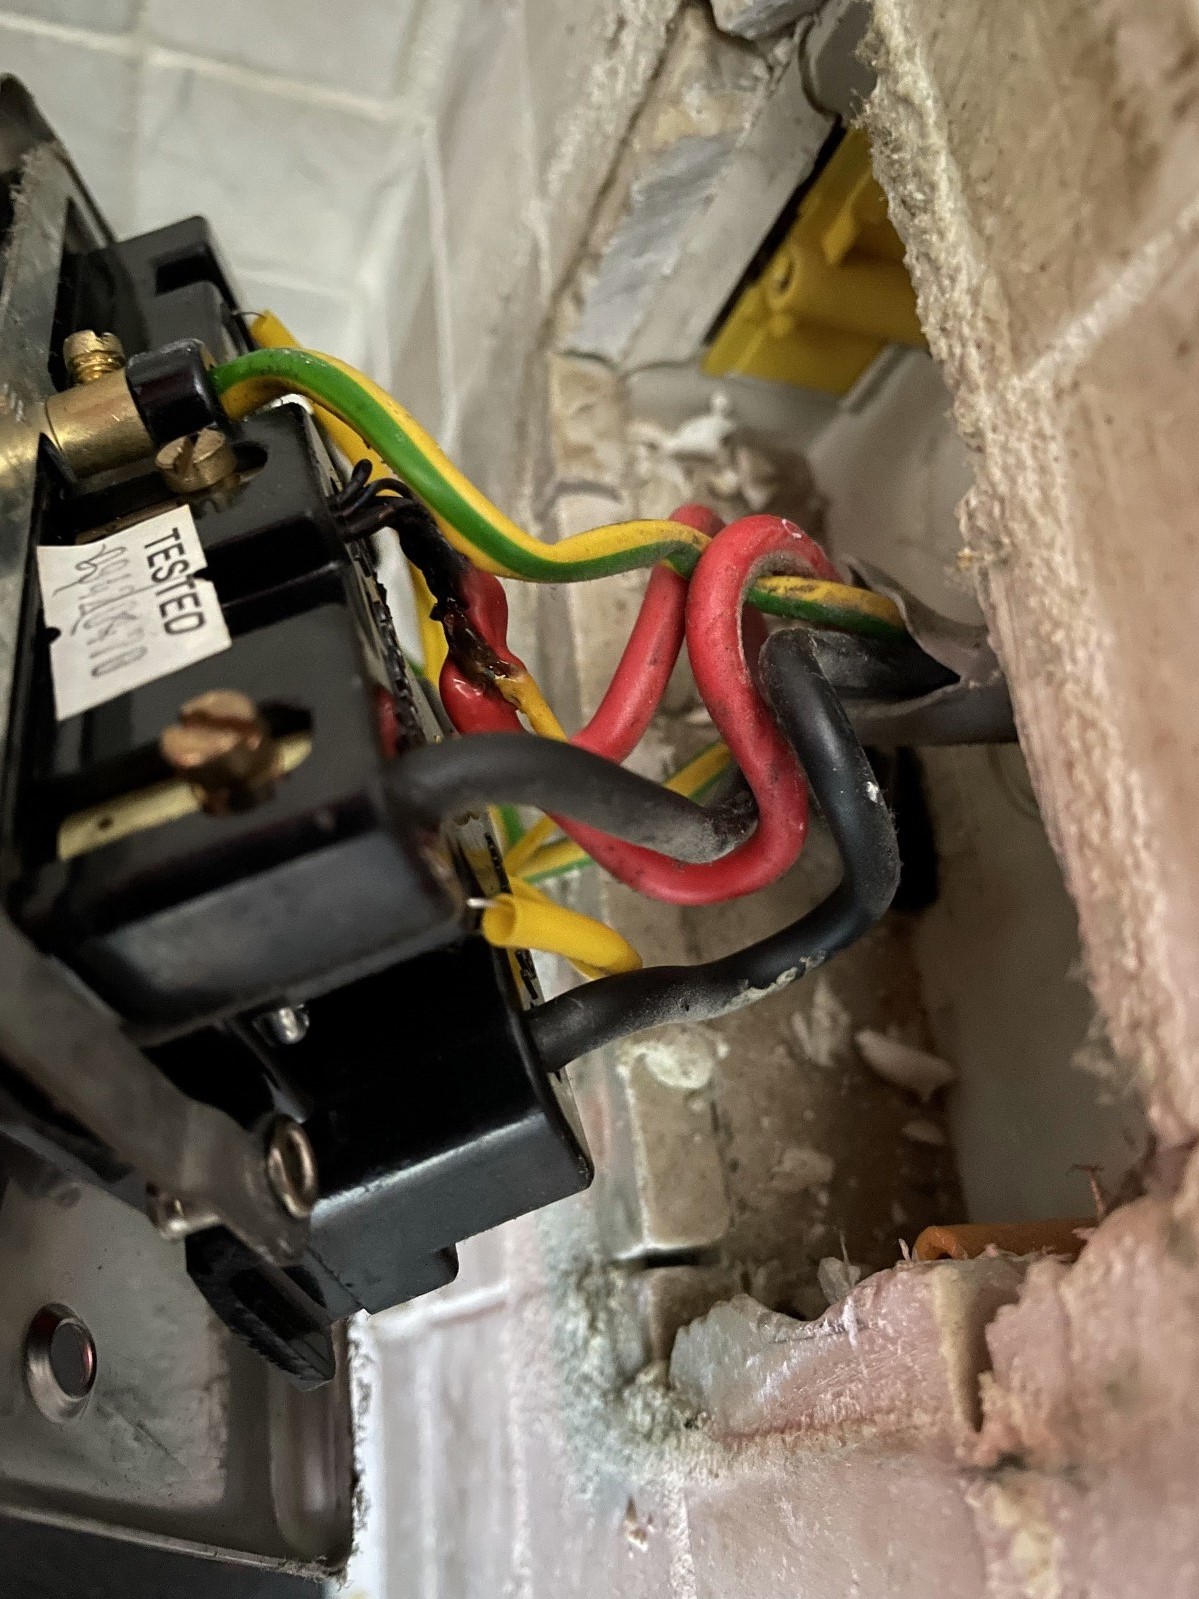 Another up close image of the fuse with the wiring bent and torn from its casing